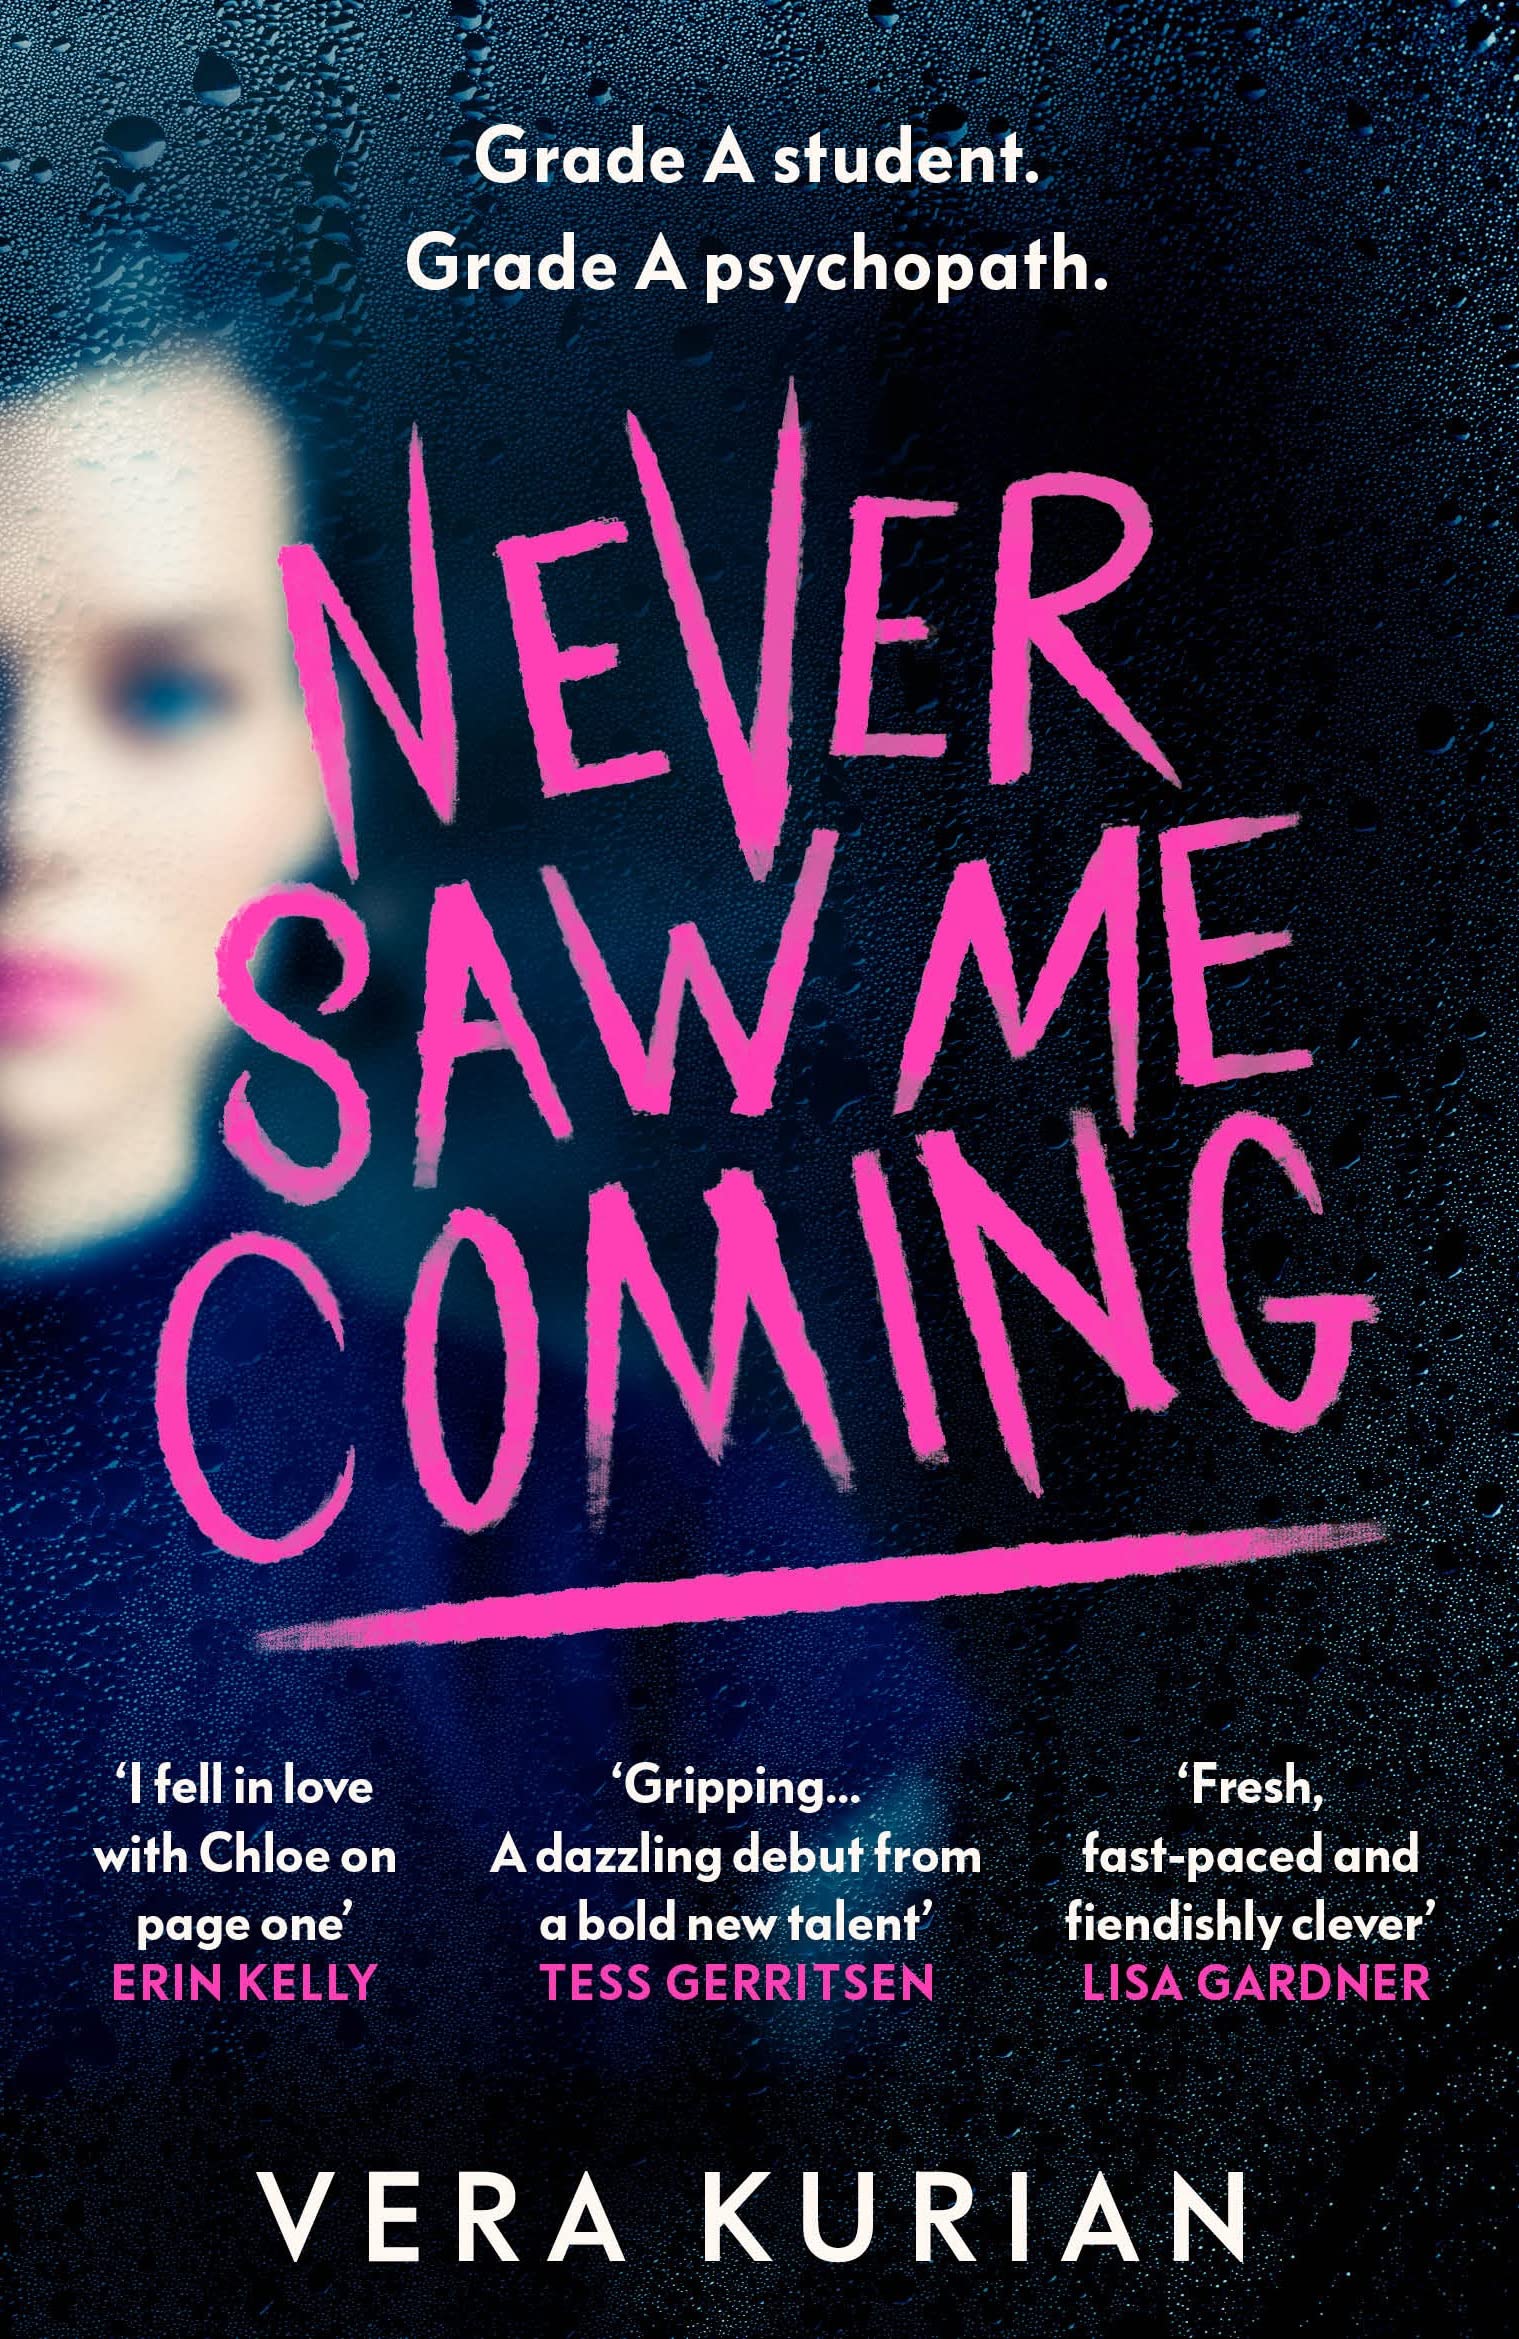 Book cover of Never Saw Me Coming by Vera Kurian